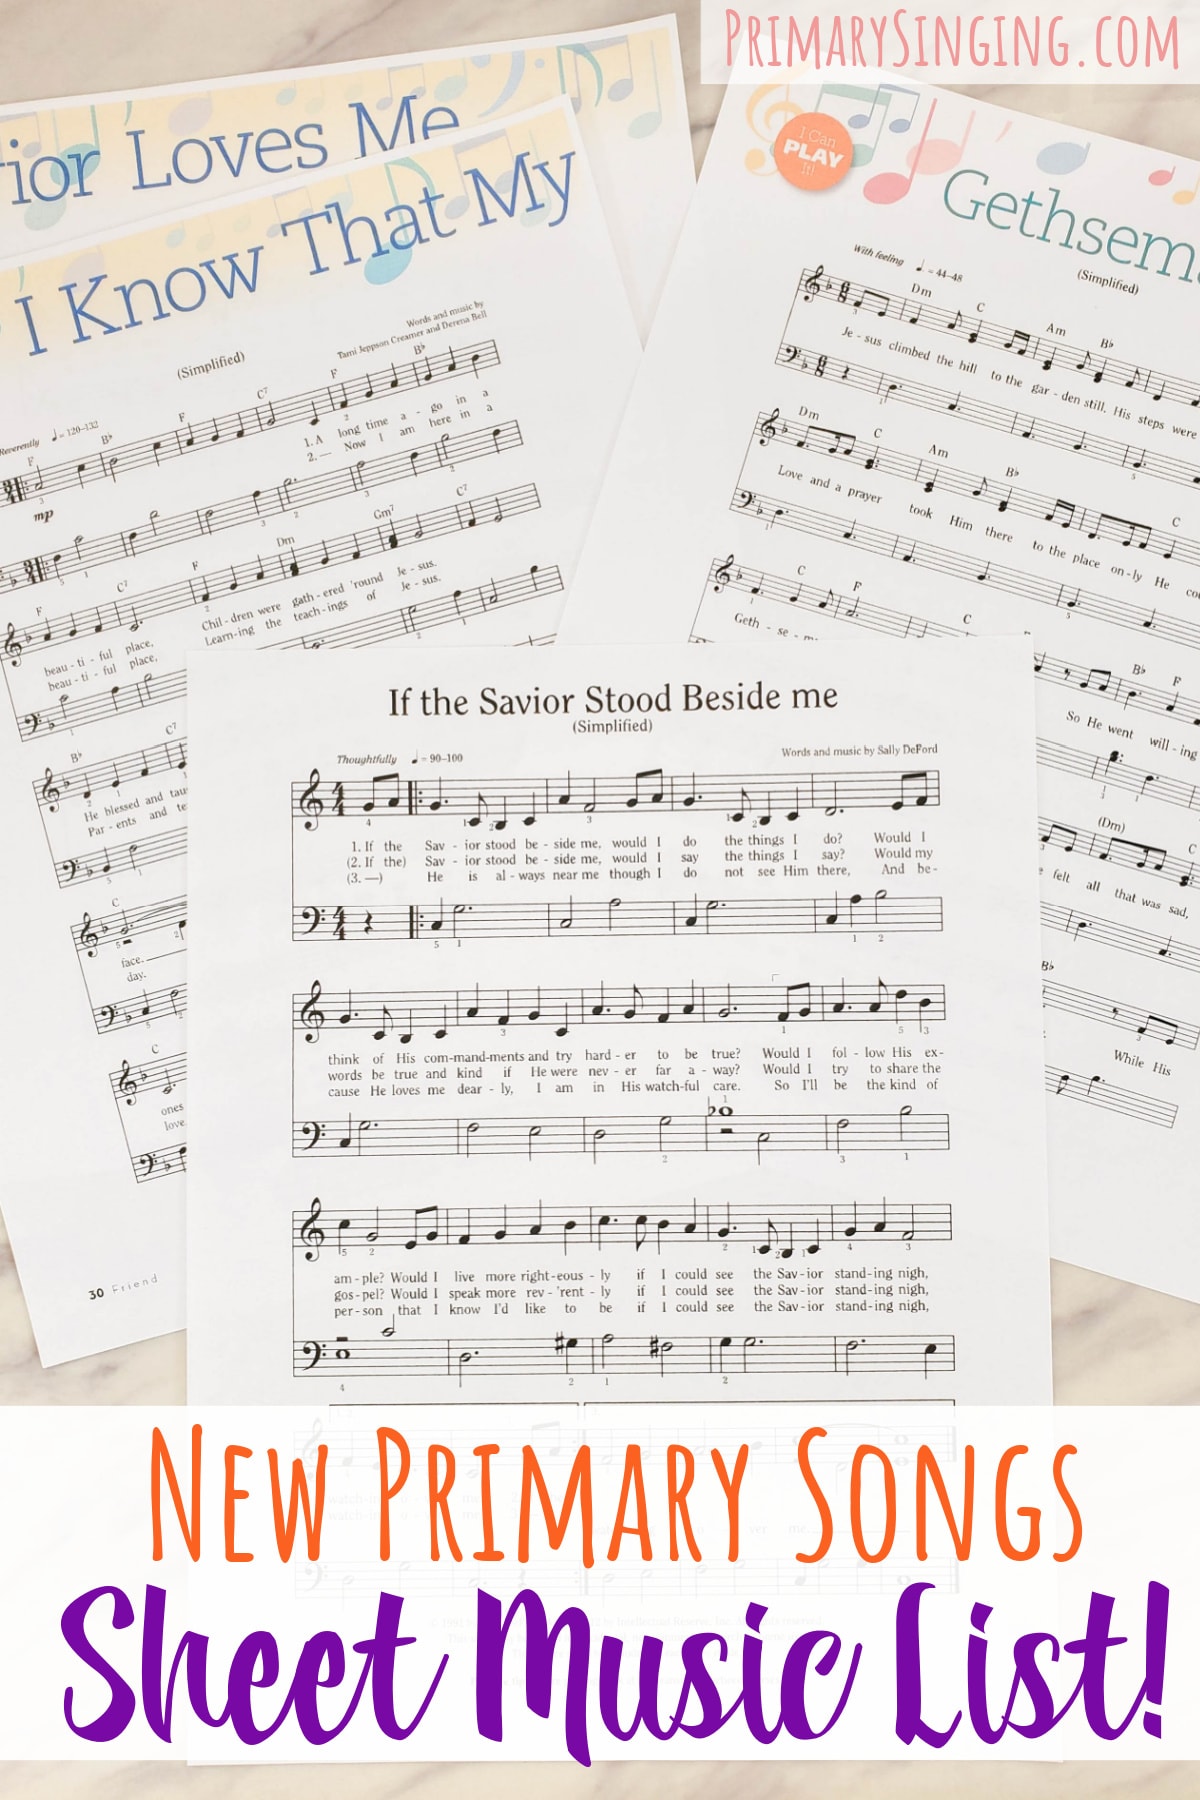 NEW Primary songs and sheet music from songs published in the Friend magazine and are considered pre-approved to teach in LDS Singing Time! So much amazing music to pick from.